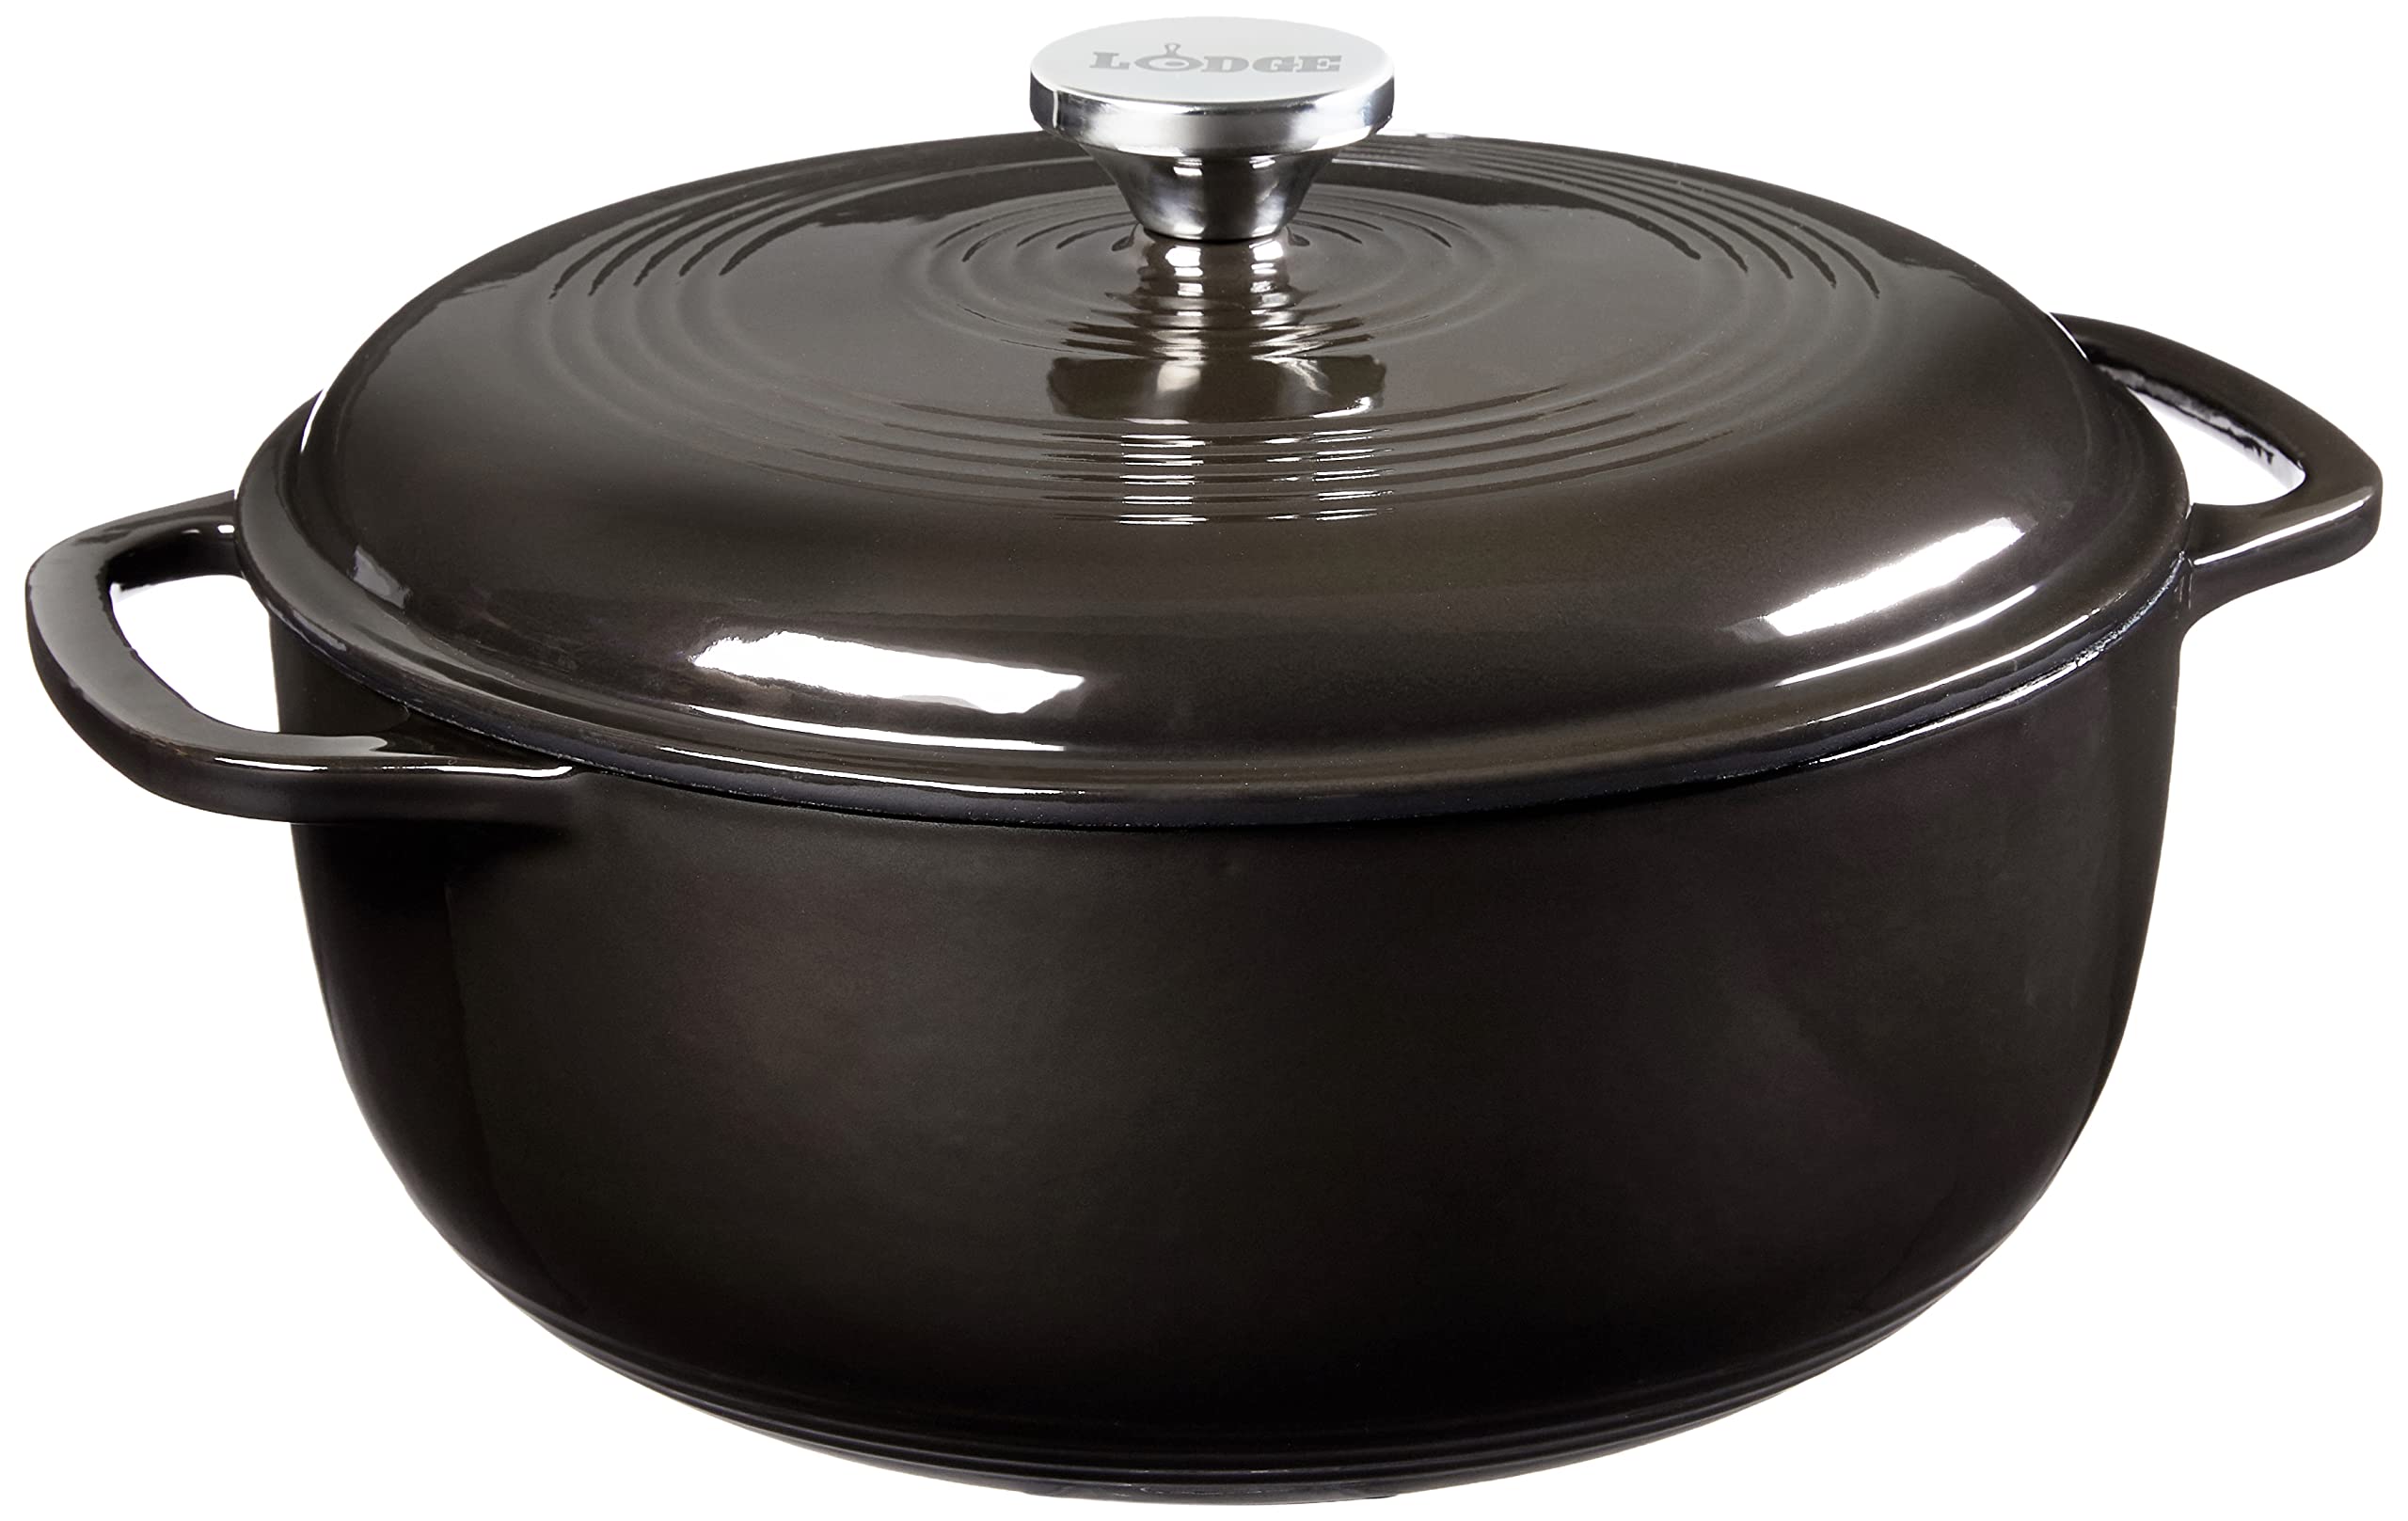 Lodge 6 Quart Enameled Cast Iron Dutch Oven with Lid – Dual Handles – Oven Safe up to 500° F or on Stovetop - Use to Marinate, Cook, Bake, Refrigerate and Serve – Midnight Chrome